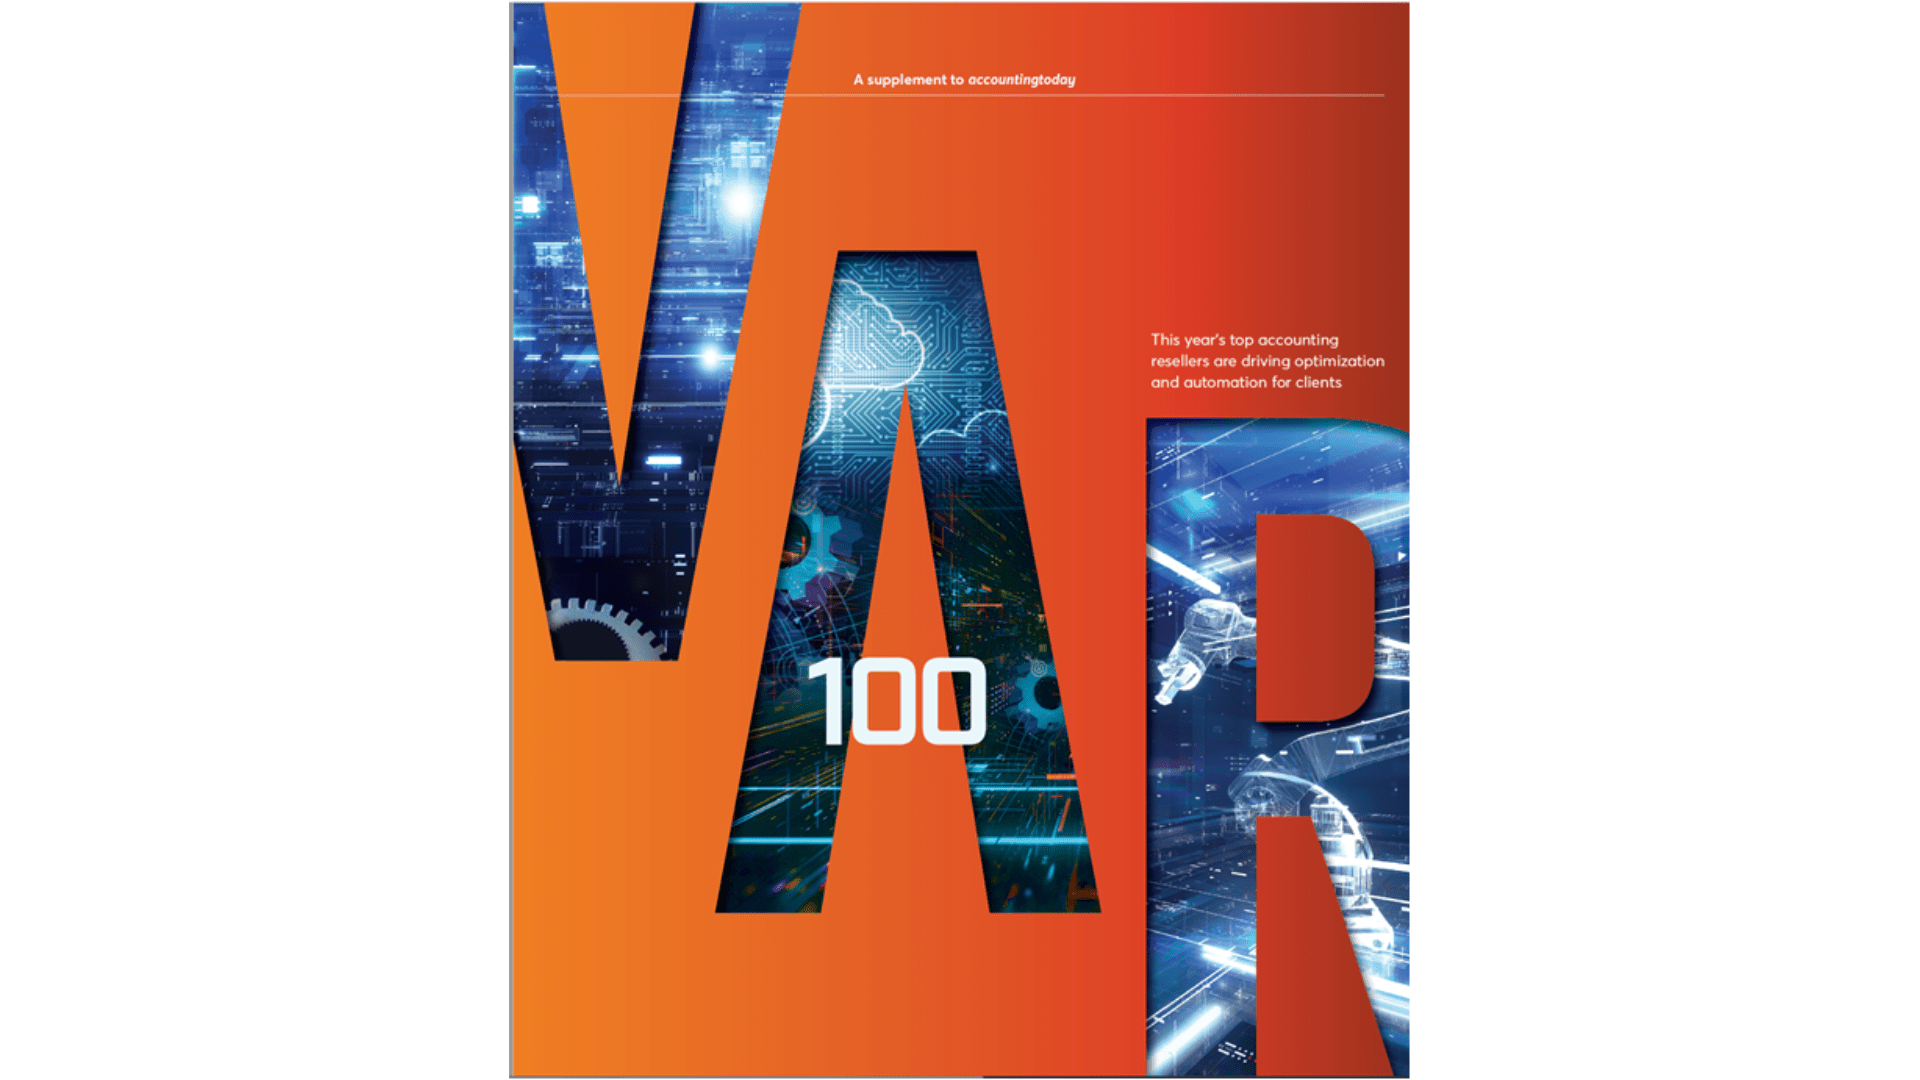 LBMC Tech Awarded Top 100 VAR by Accounting Today